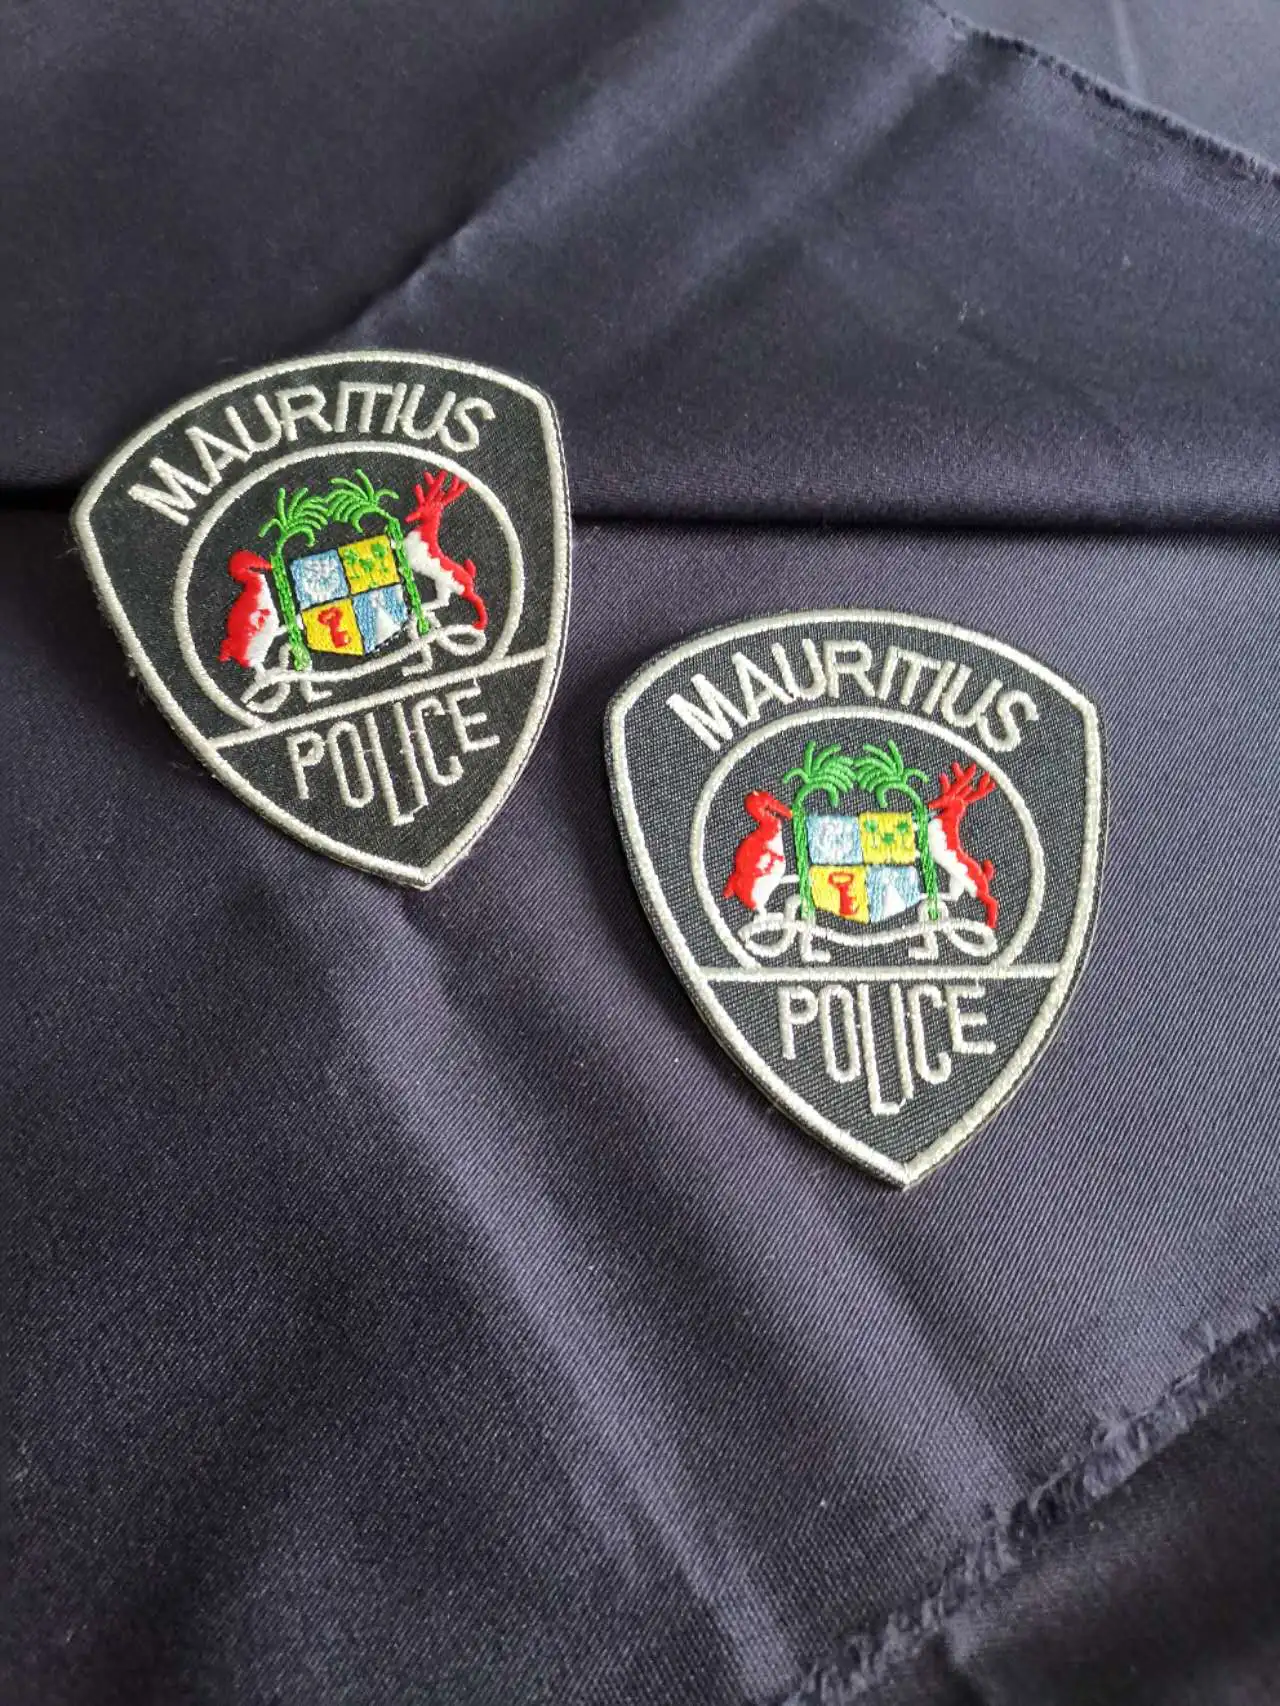 We are certificated uniform fabric supplier of Mauritius Police Ministry